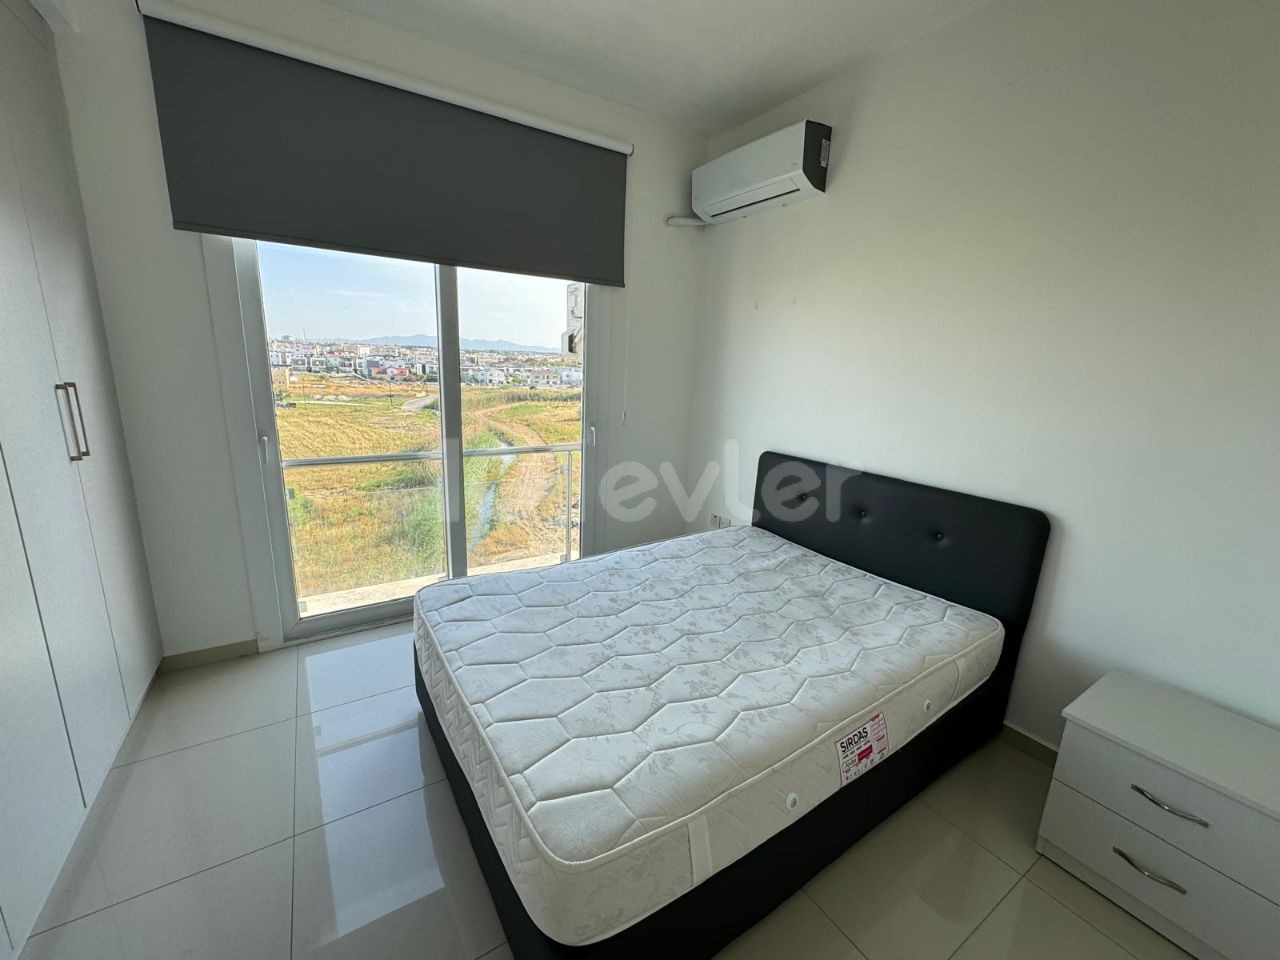 Fully Furnished Flat for Rent in Yenikent, Nicosia, within Walking Distance to the Bus Stop, with a Great Location!